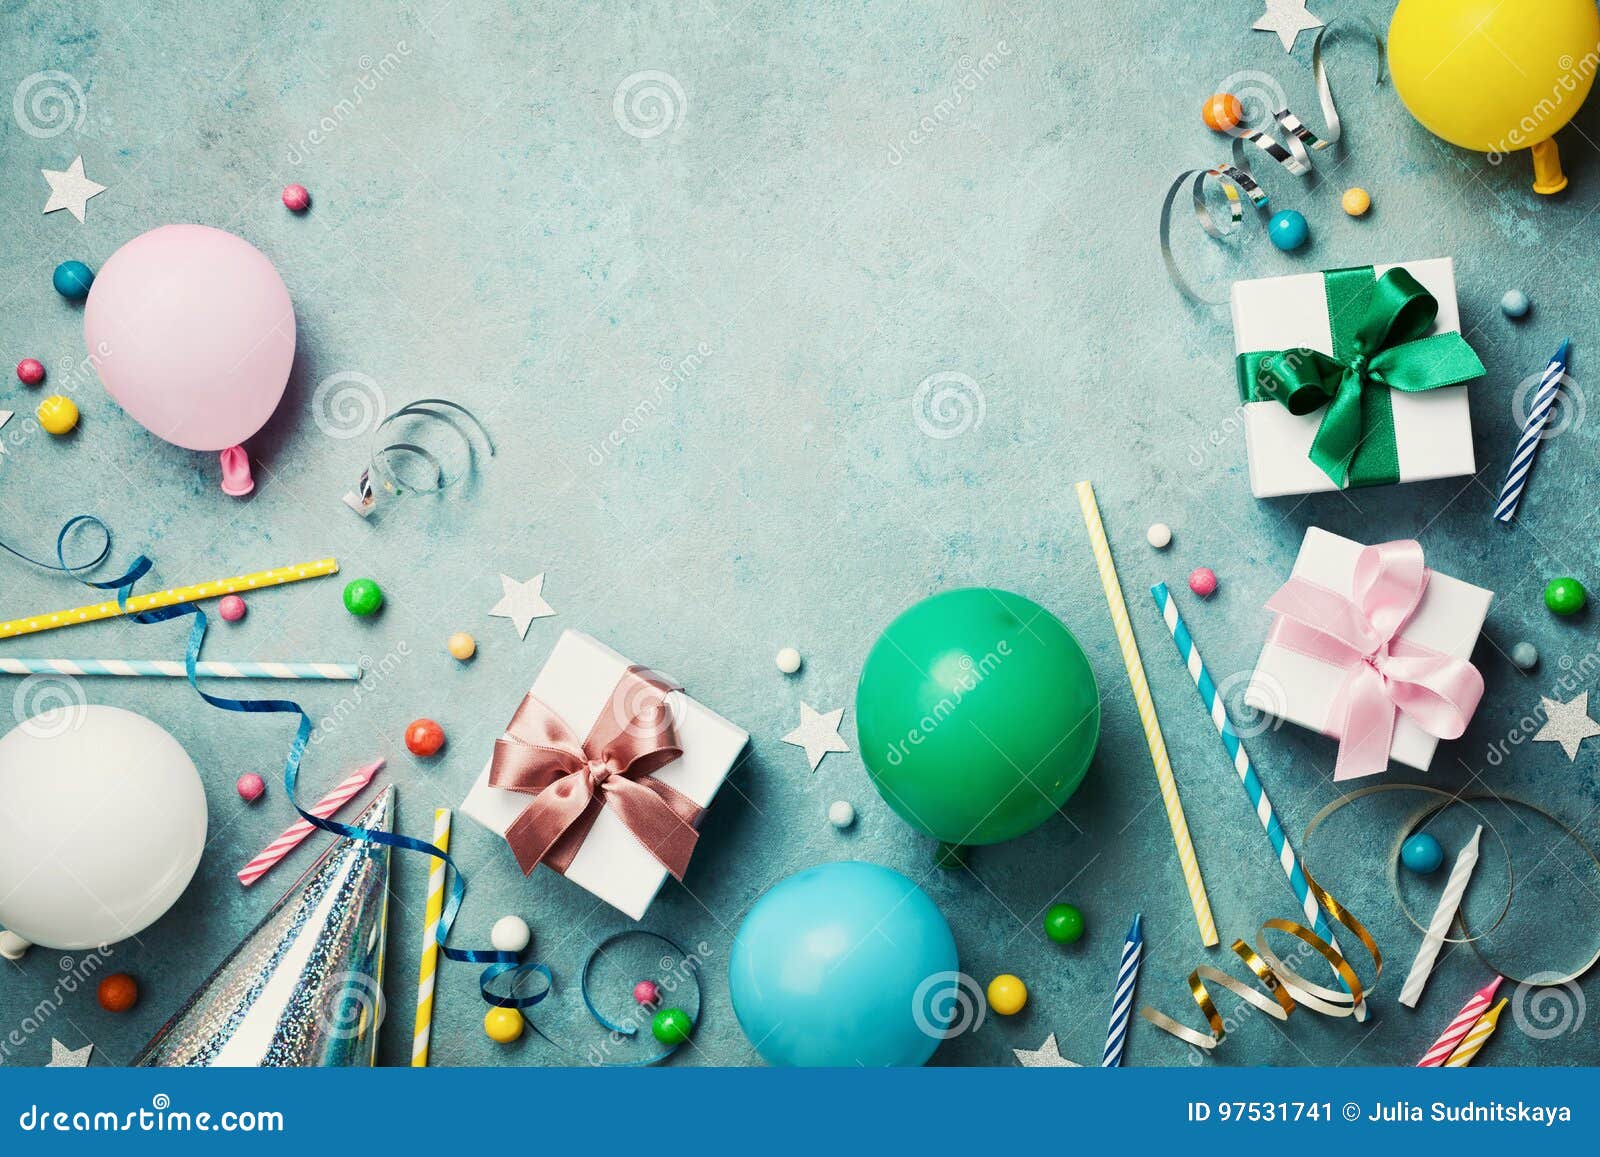 Colorful balloon, present or gift box, confetti, candy and streamer on vintage turquoise table top view. Birthday background. Colorful balloon, present or gift box, confetti, candy and streamer on vintage turquoise table top view. Birthday or party background. Flat lay style. Copy space for text.